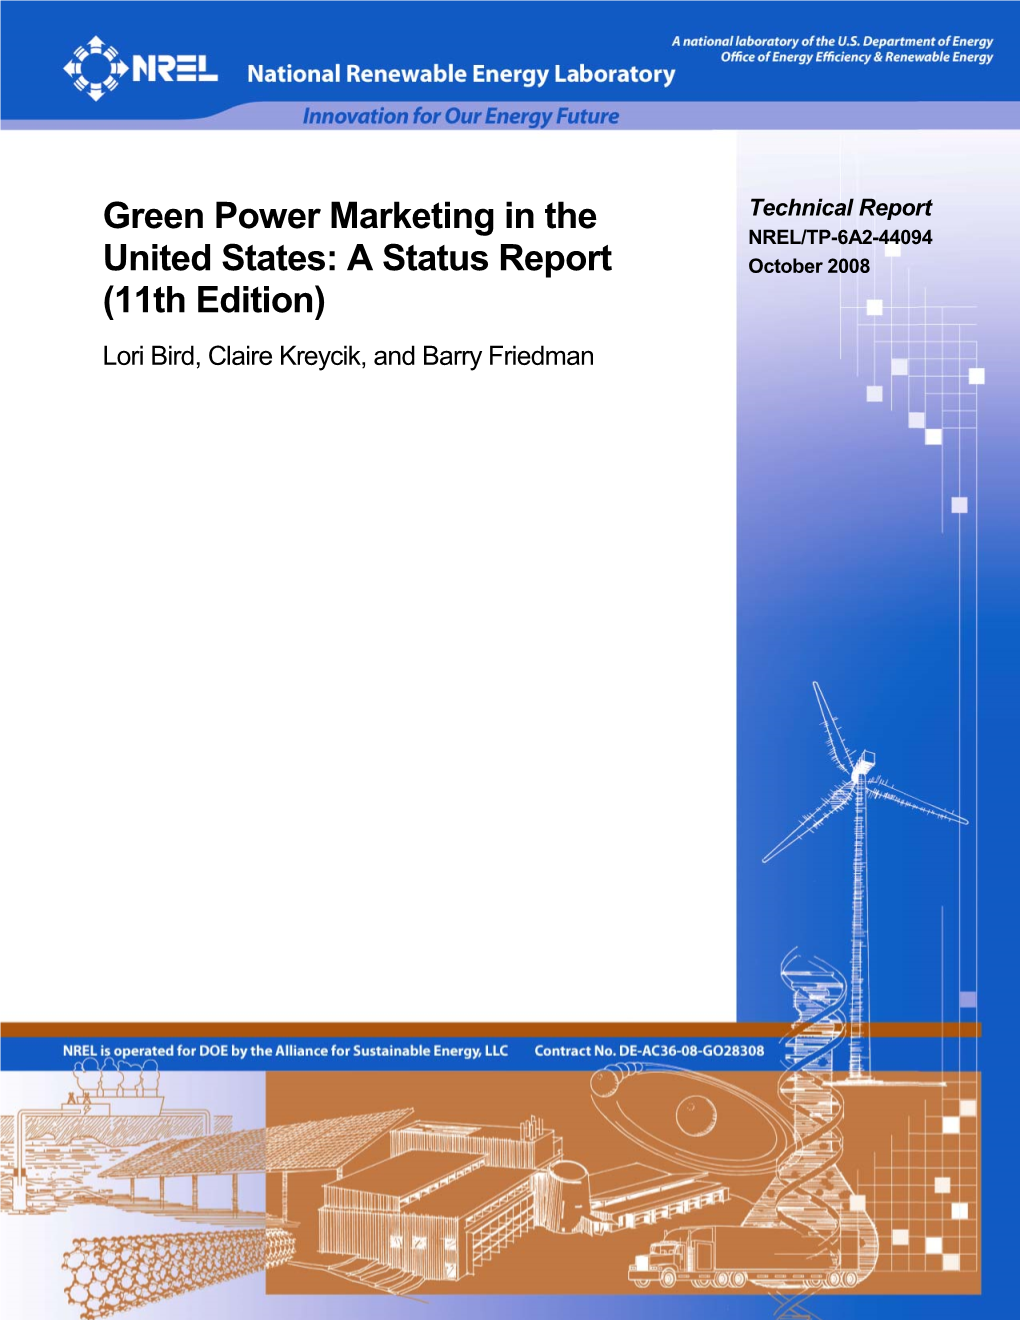 Green Power Marketing in the United States: a Status Report (Tenth Edition), NREL/TP-670-42502